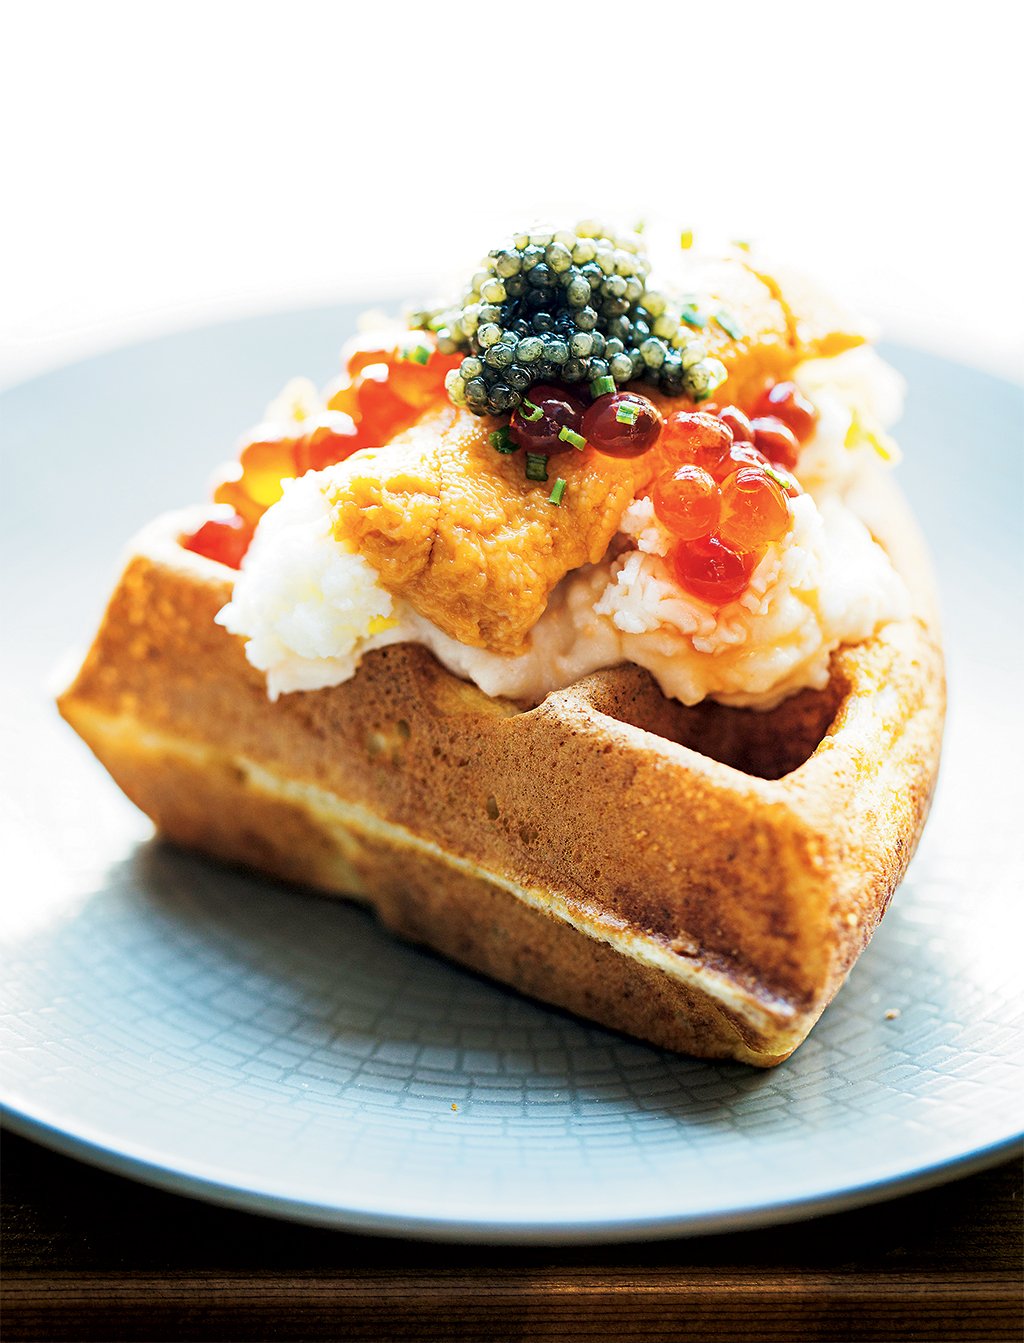 Inside our March 2016 issue: Jonah Kim brings a fine-dining background to Yona in Ballston. Exhibit A: his waffle laden with sea urchin and salmon roe. Photograph by Scott Suchman.